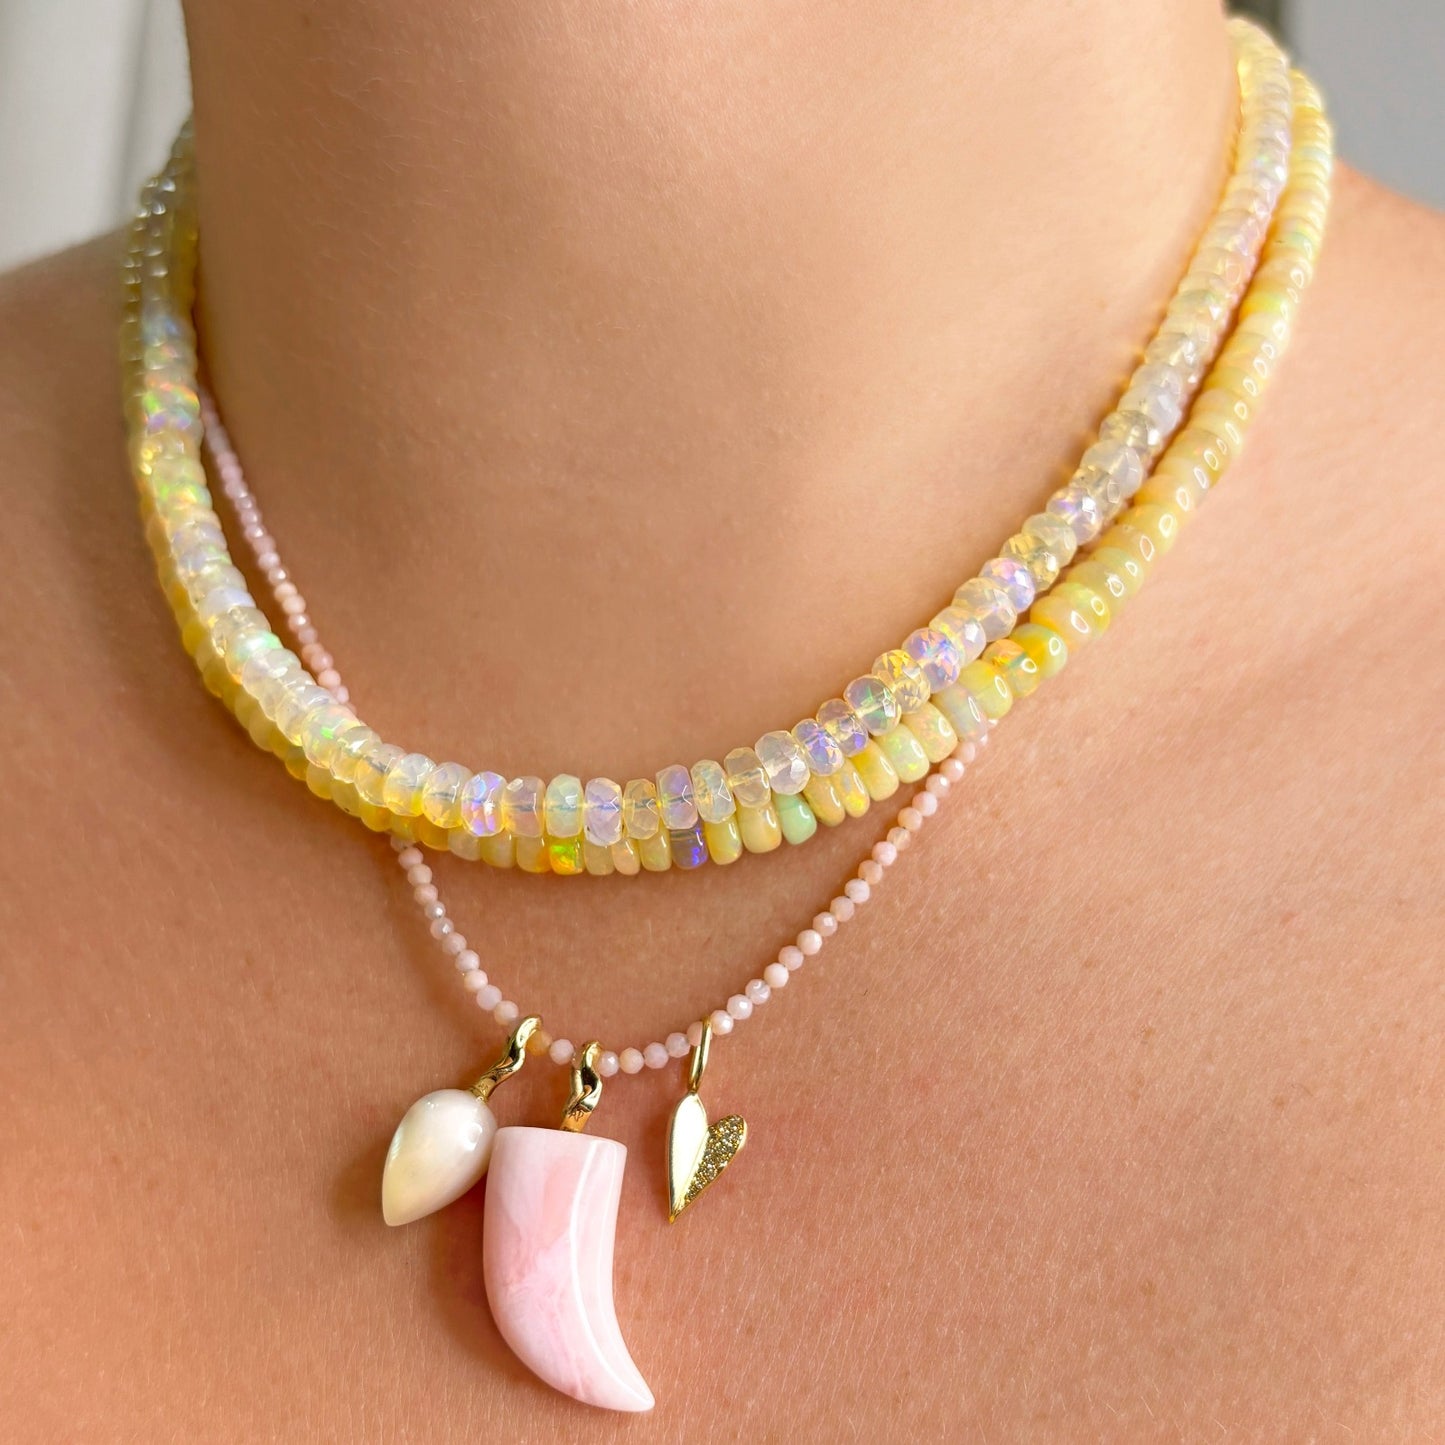 Mother of Pearl acorn drop charm. Styled on a neck with a horn and folded heart charms hanging from a beaded necklace.